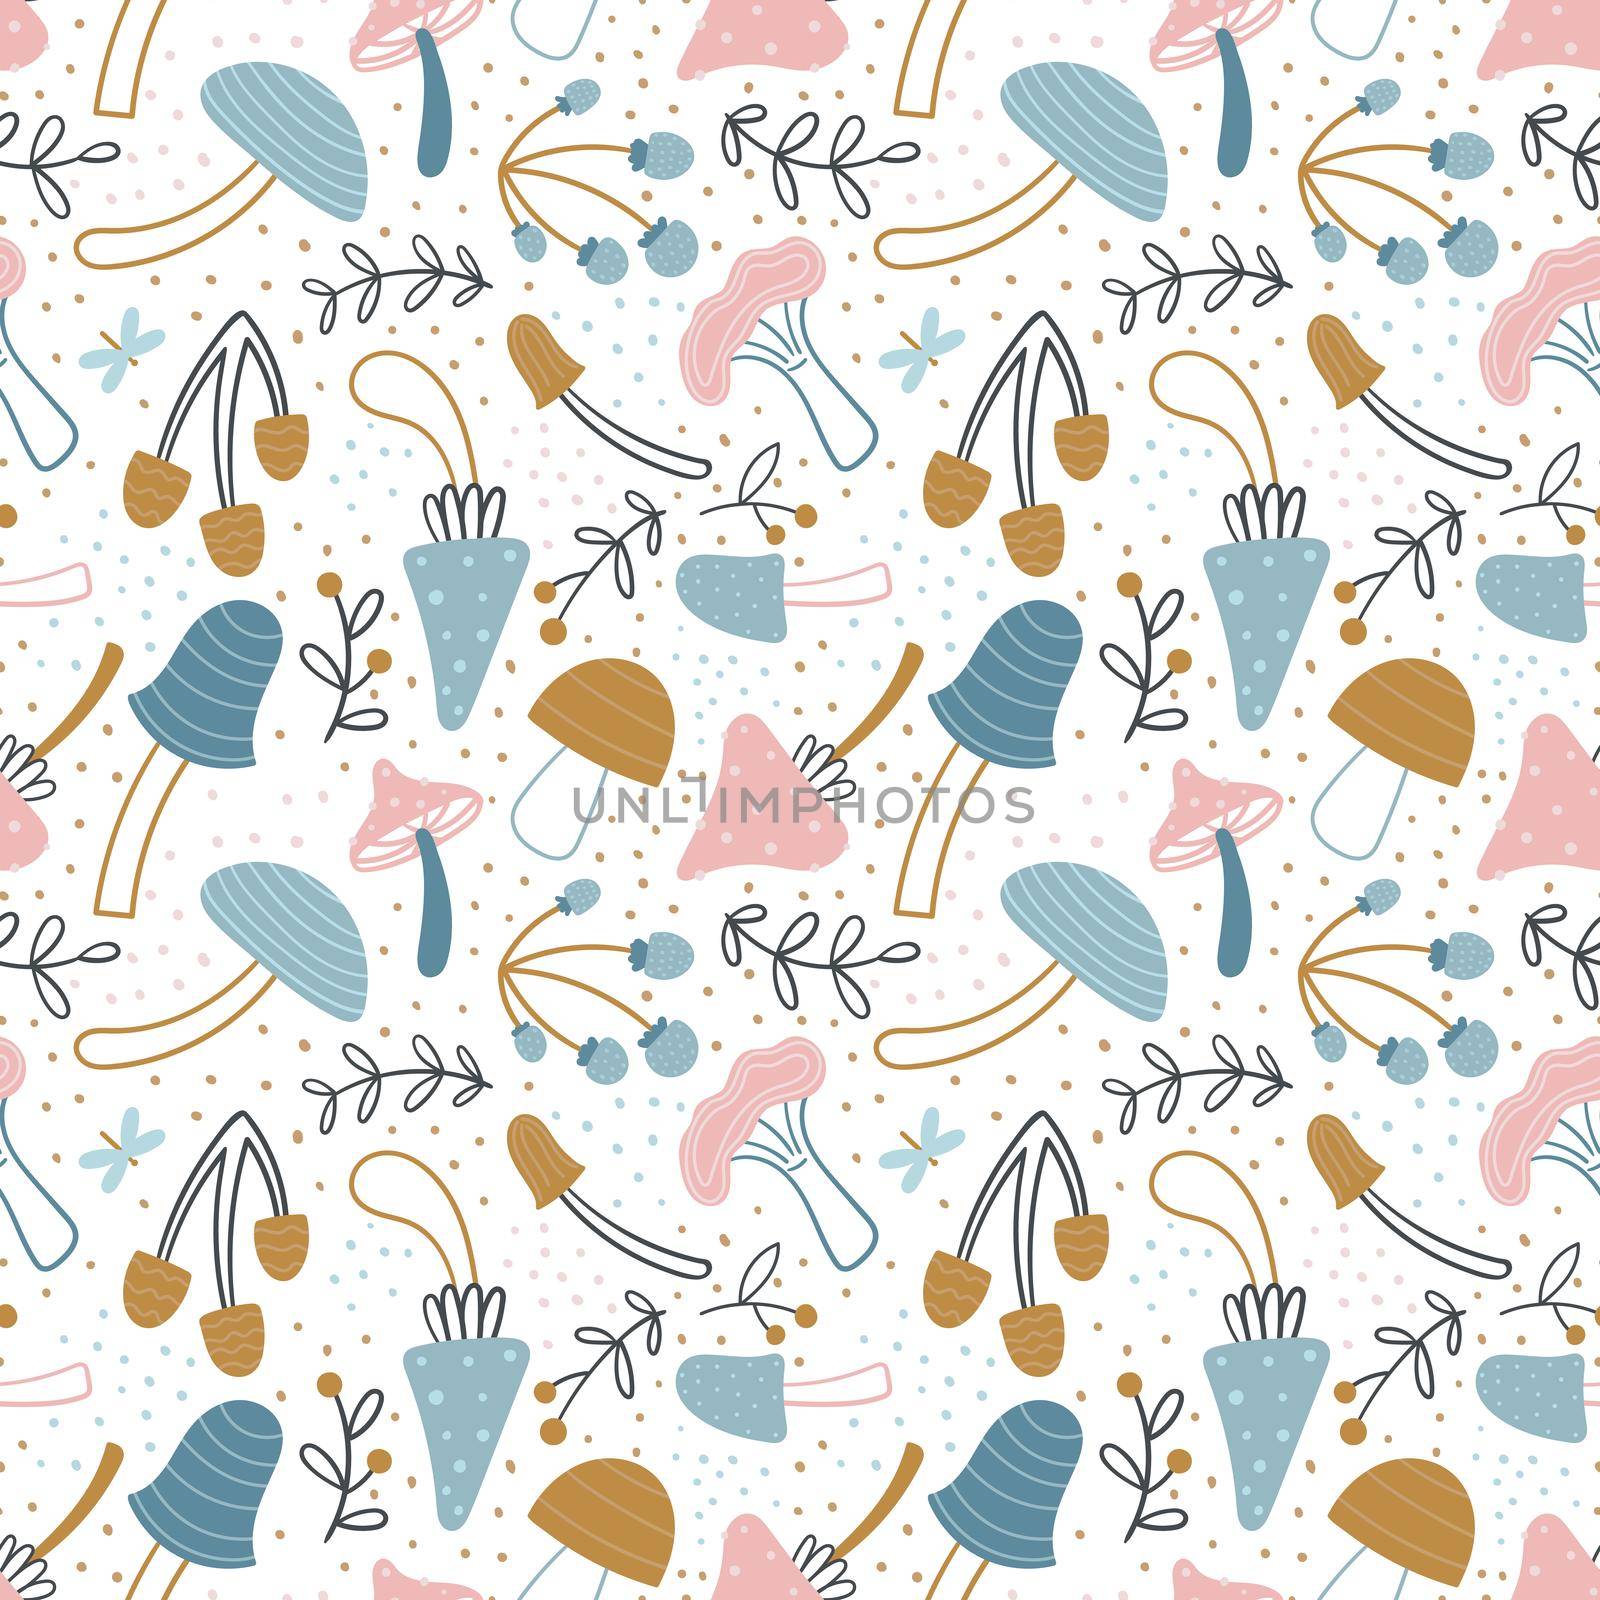 Mushrooms seamless pattern. Cute mushrooms in doodle style on a white background. Pastel palette. Autumn design for fabric, textile, etc. Vector illustration